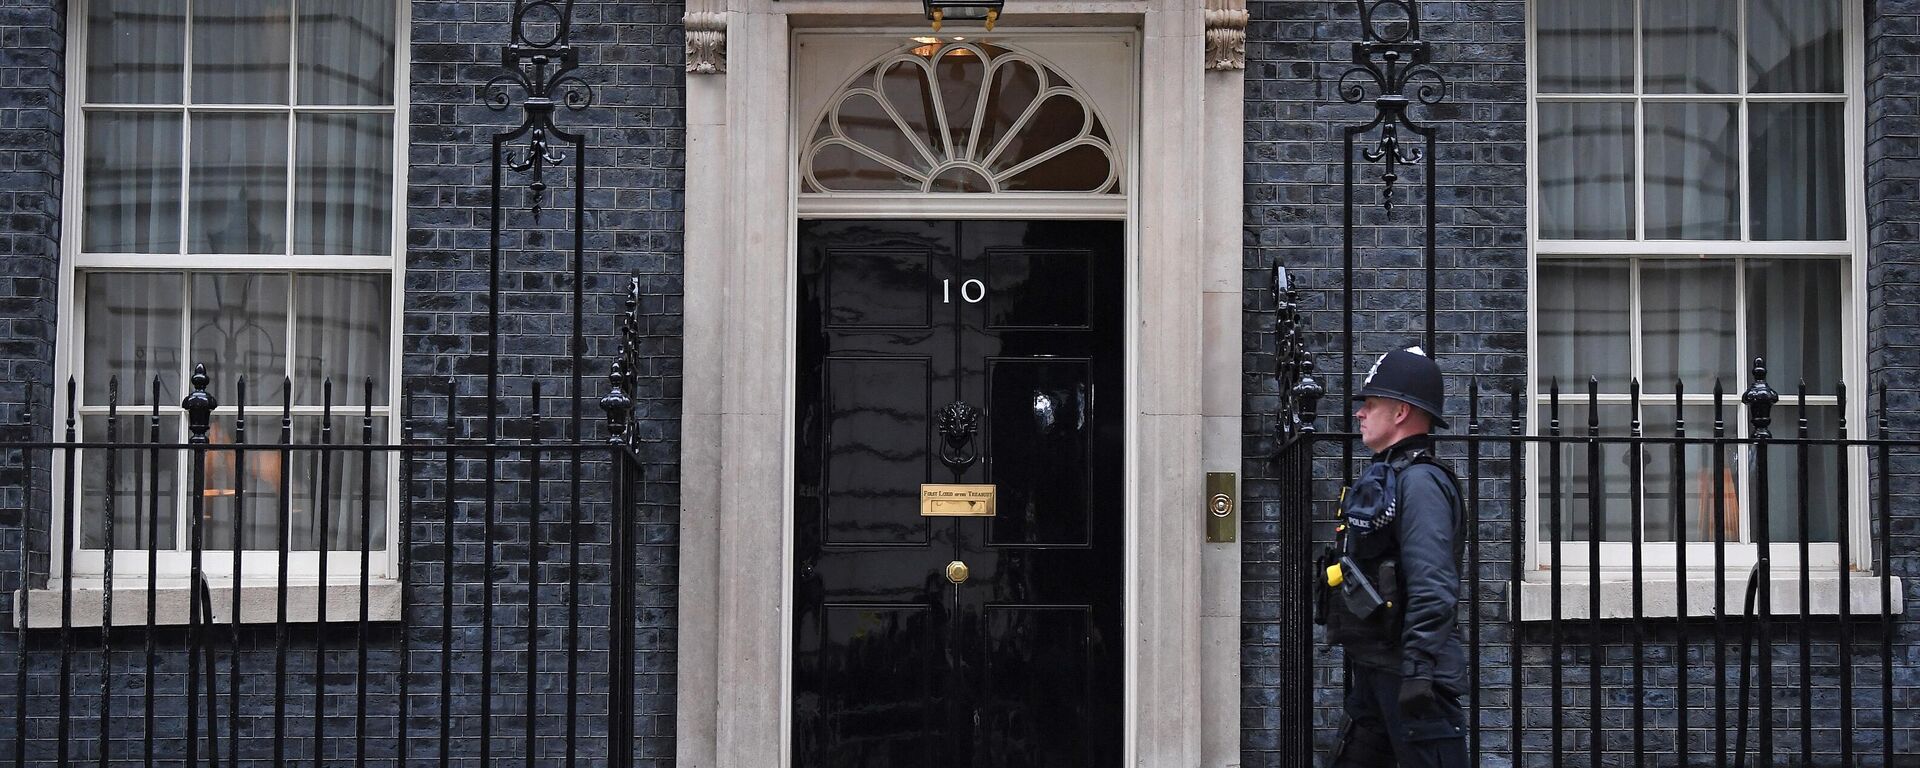 A police officer walks past the door to 10 Downing Street, the official residence of Britain's Prime Minister, in London on January 25, 2022 - Sputnik International, 1920, 15.02.2022